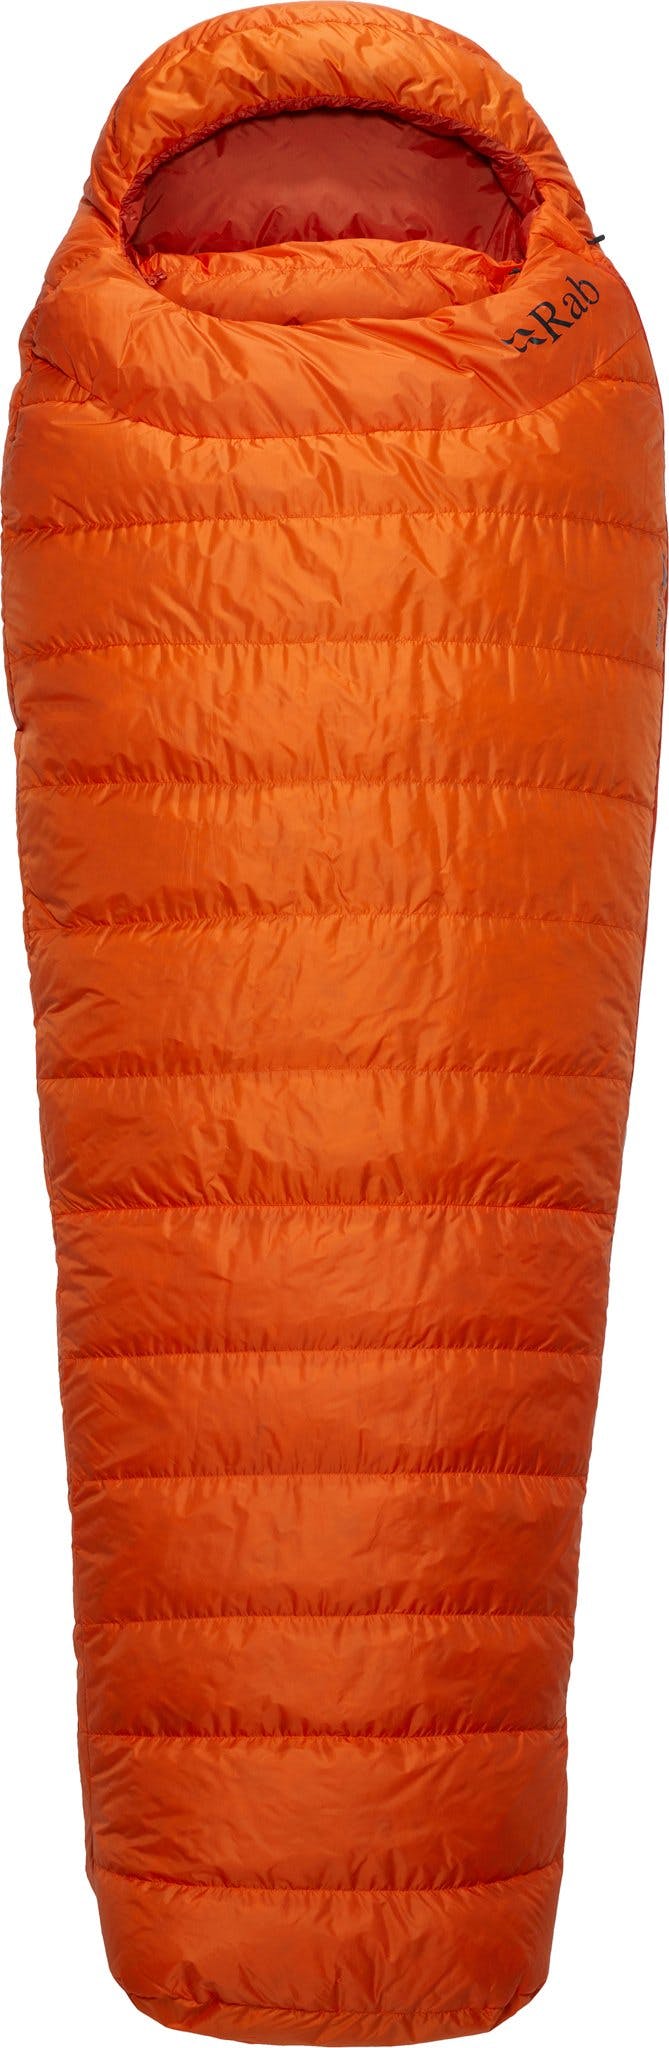 Product image for Ascent 300 Down Sleeping Bag 35°F / 1°C - Long